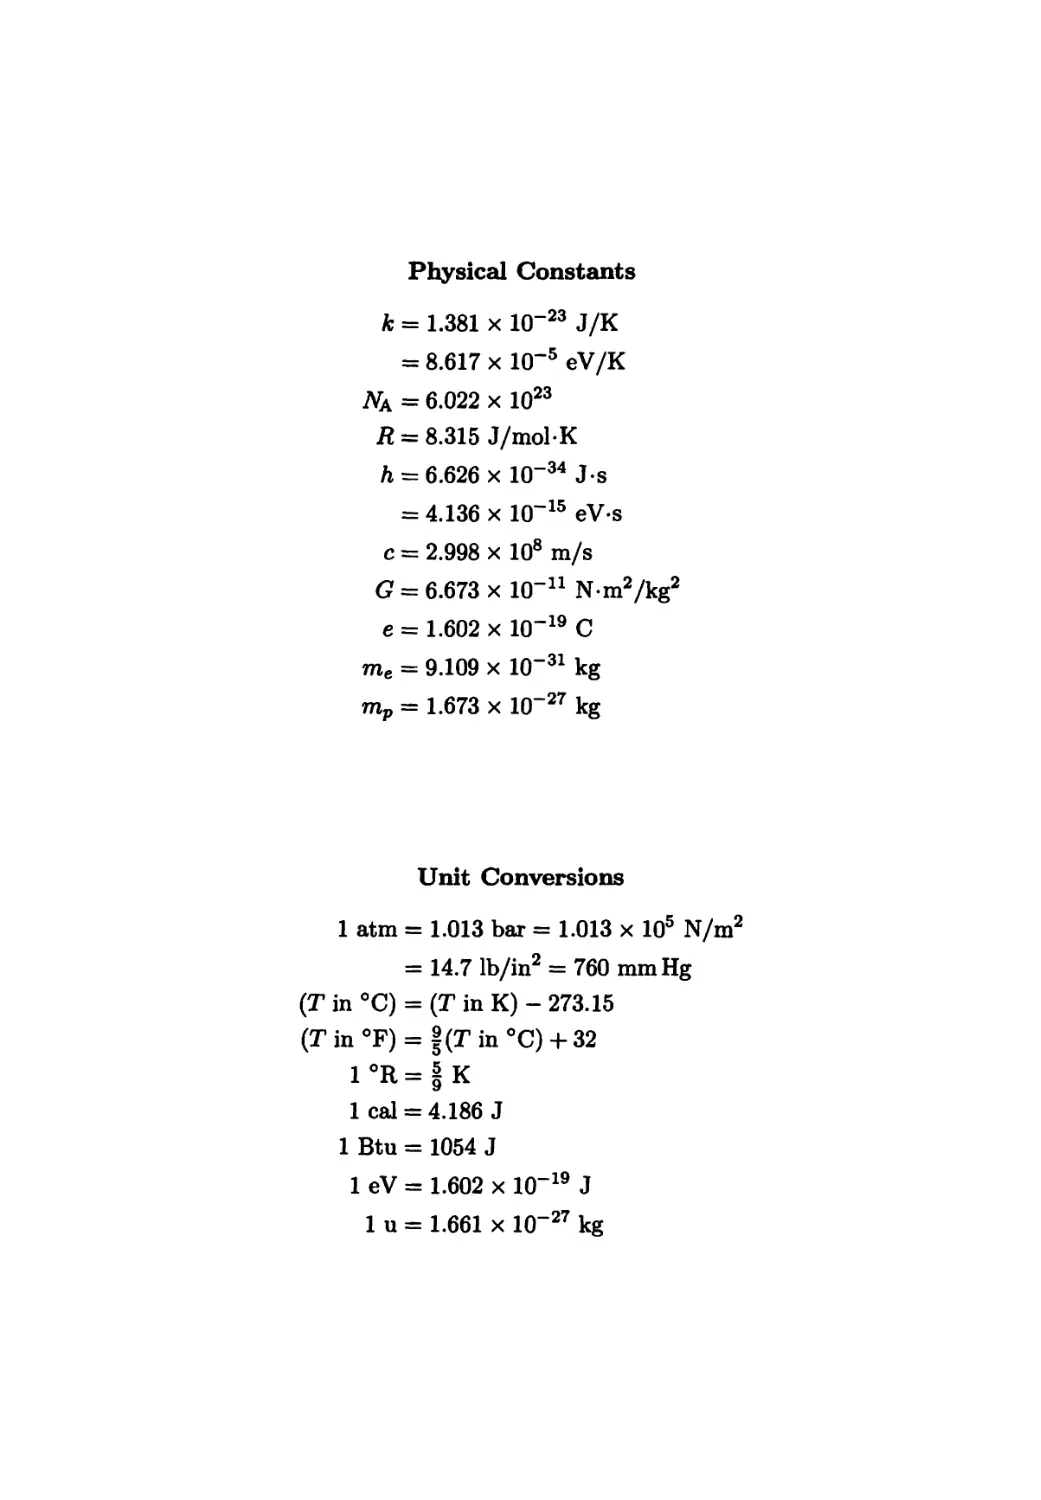 Physical Constants and Unit Conversions